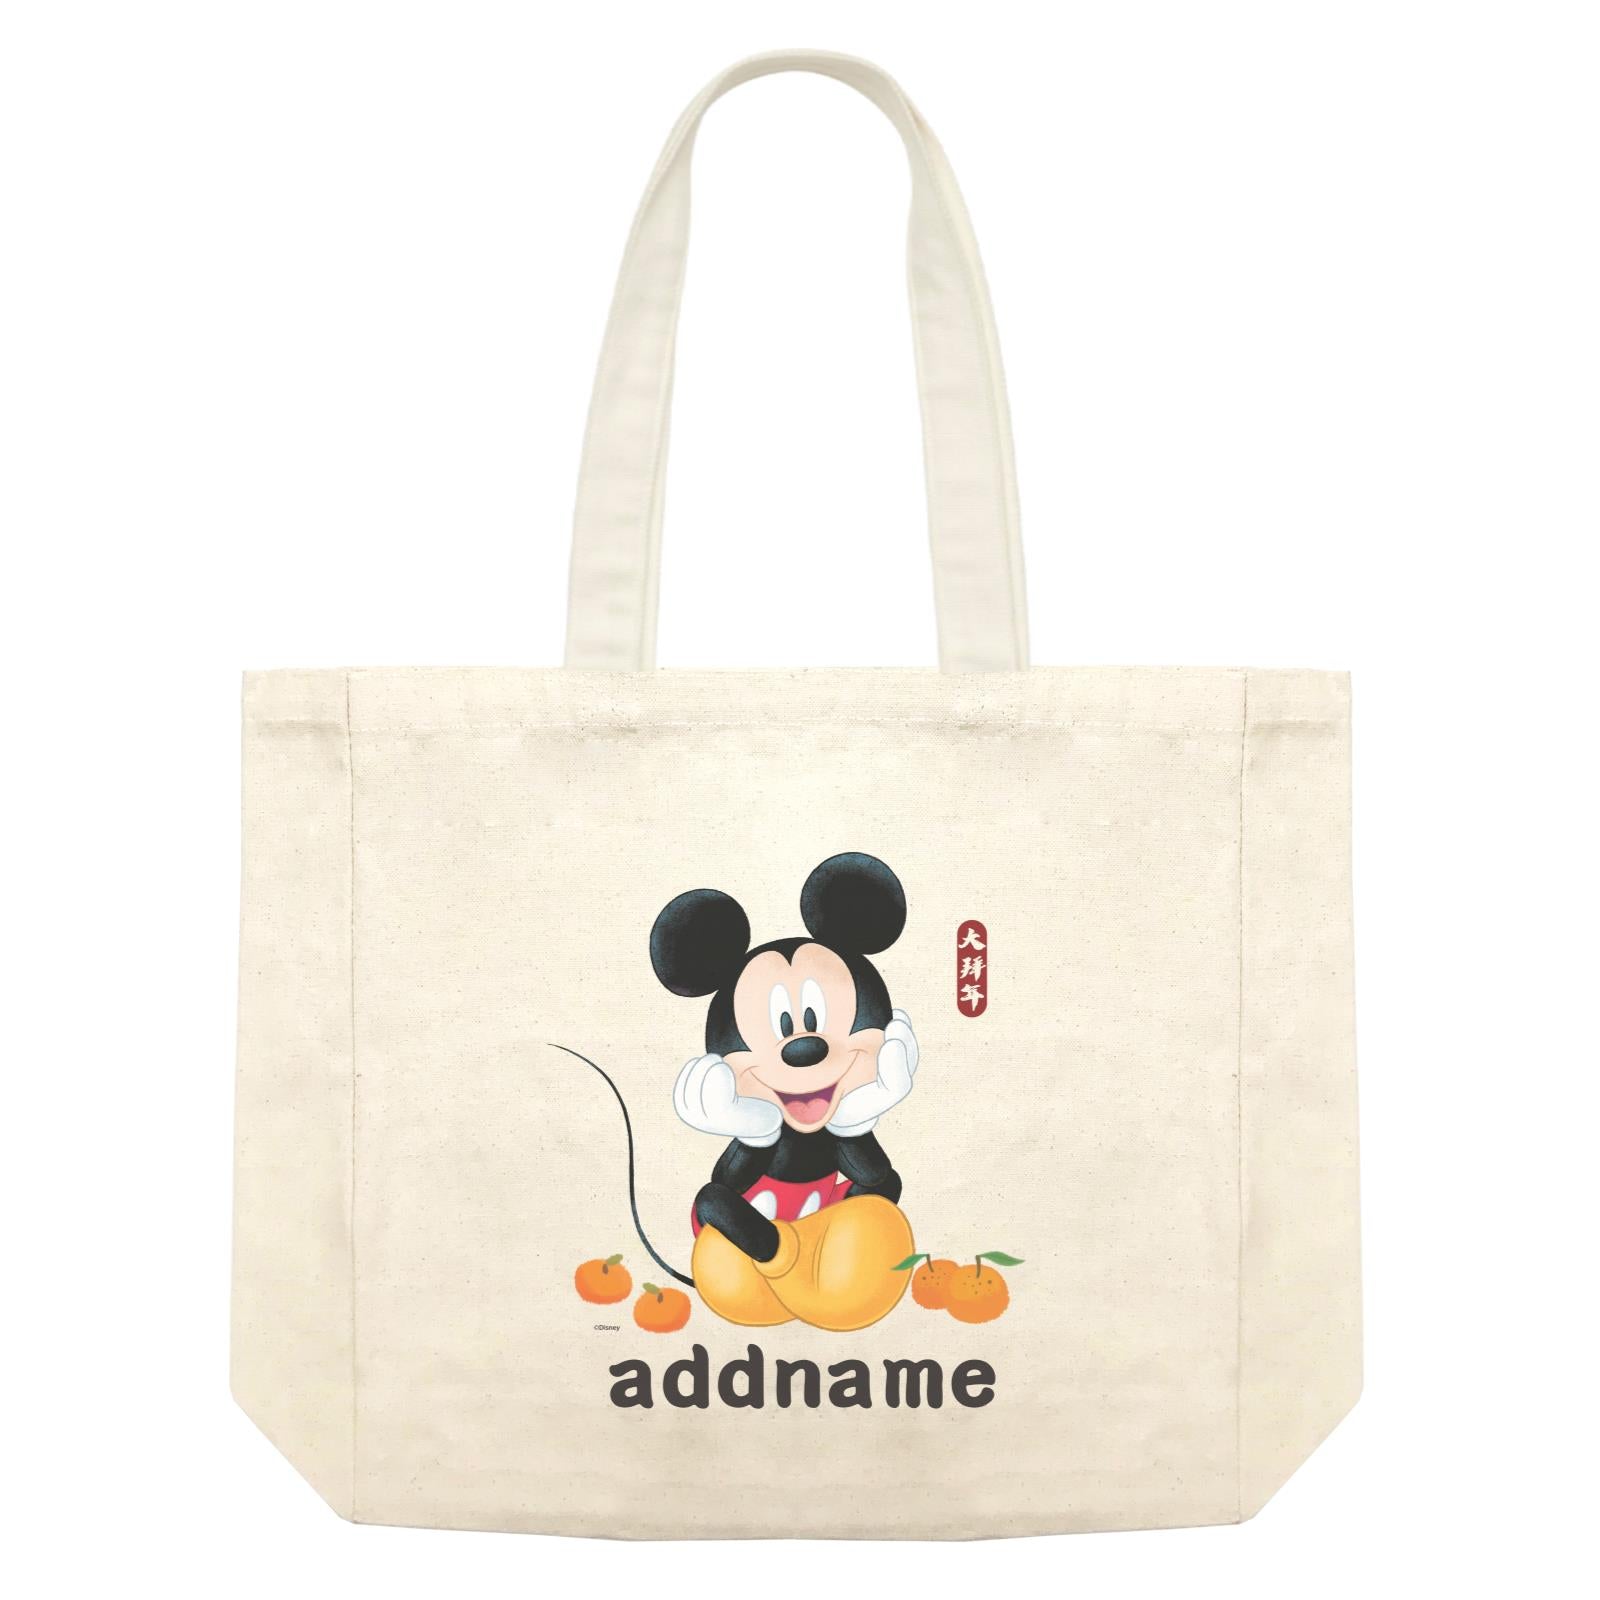 Disney CNY Mickey With Mandarins and Gold Elements Personalised SHB Shopping Bag